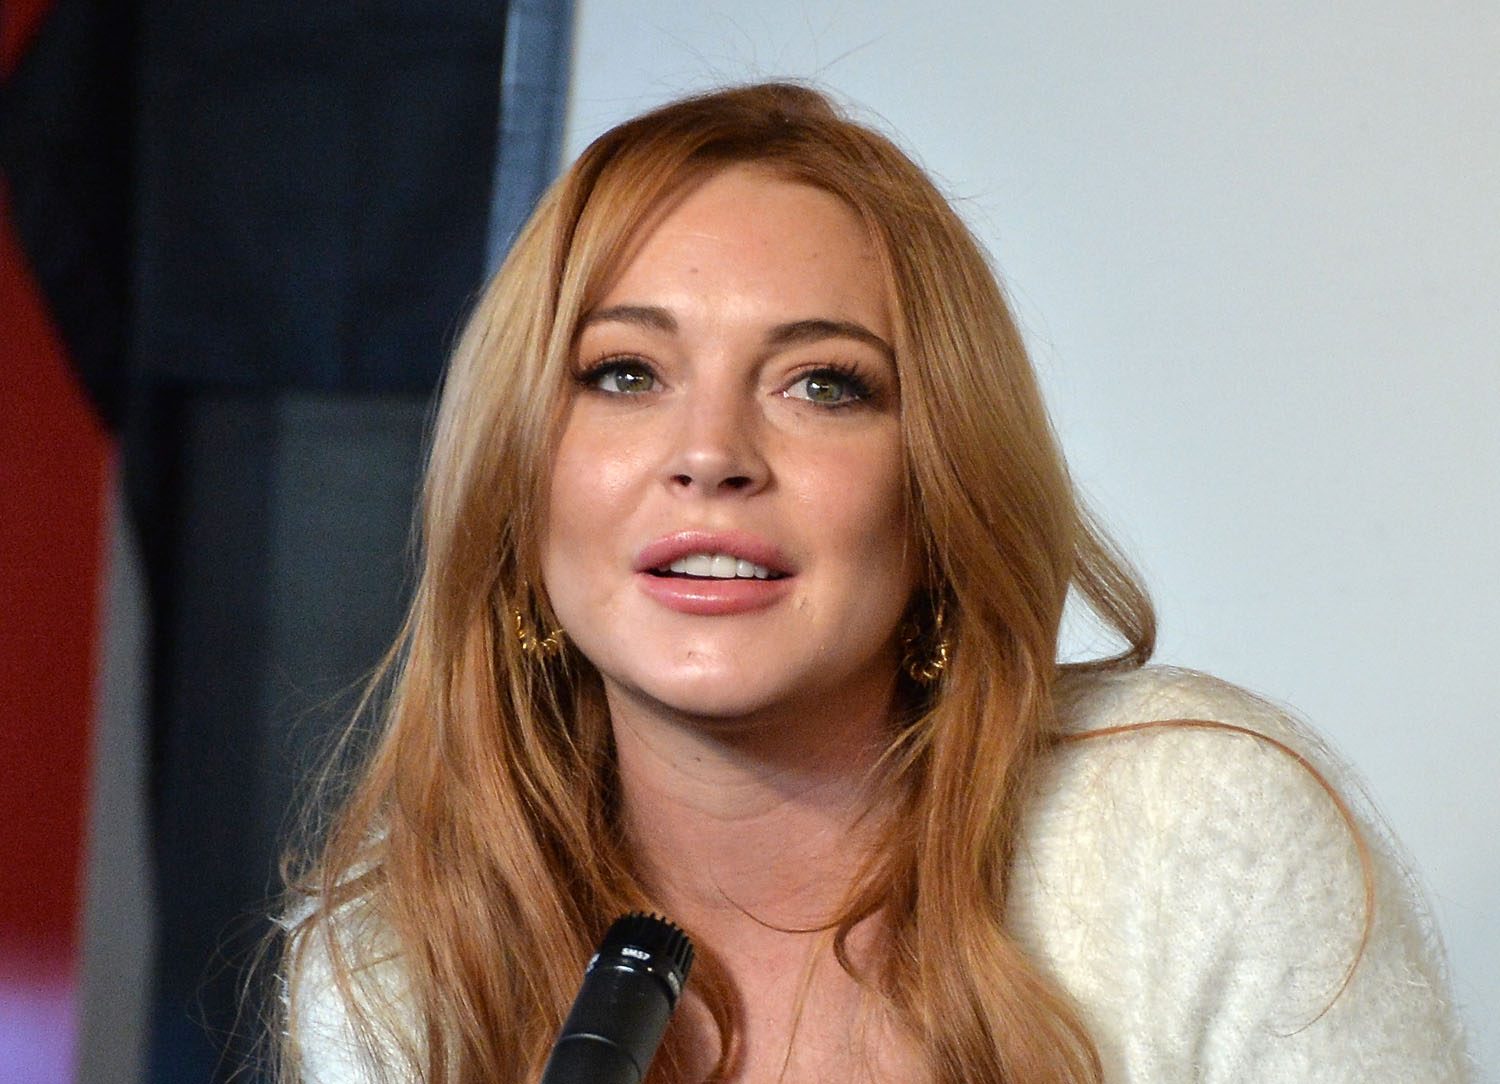 Actress Lindsay Lohan speaks at a press conference on Jan. 20, 2014 in Park City, Utah. (George Pimentel&mdash;Getty Images)